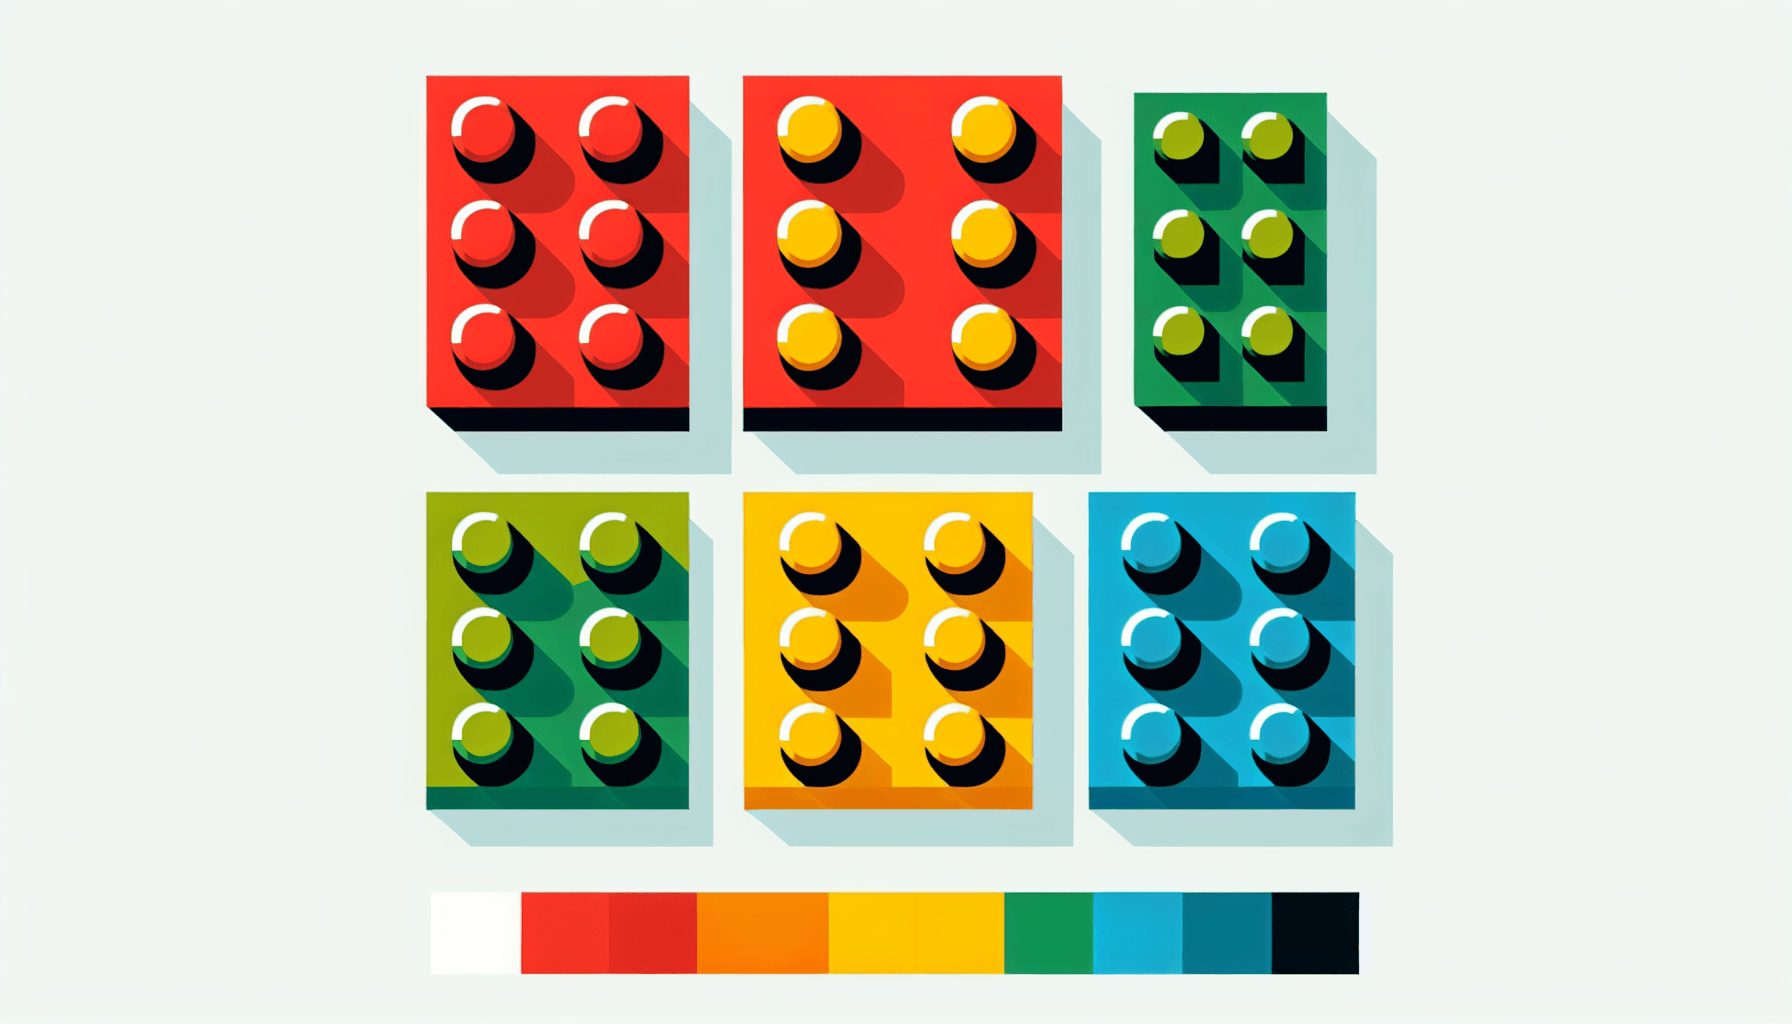 Lego in flat illustration style and white background, red #f47574, green #88c7a8, yellow #fcc44b, and blue #645bc8 colors.